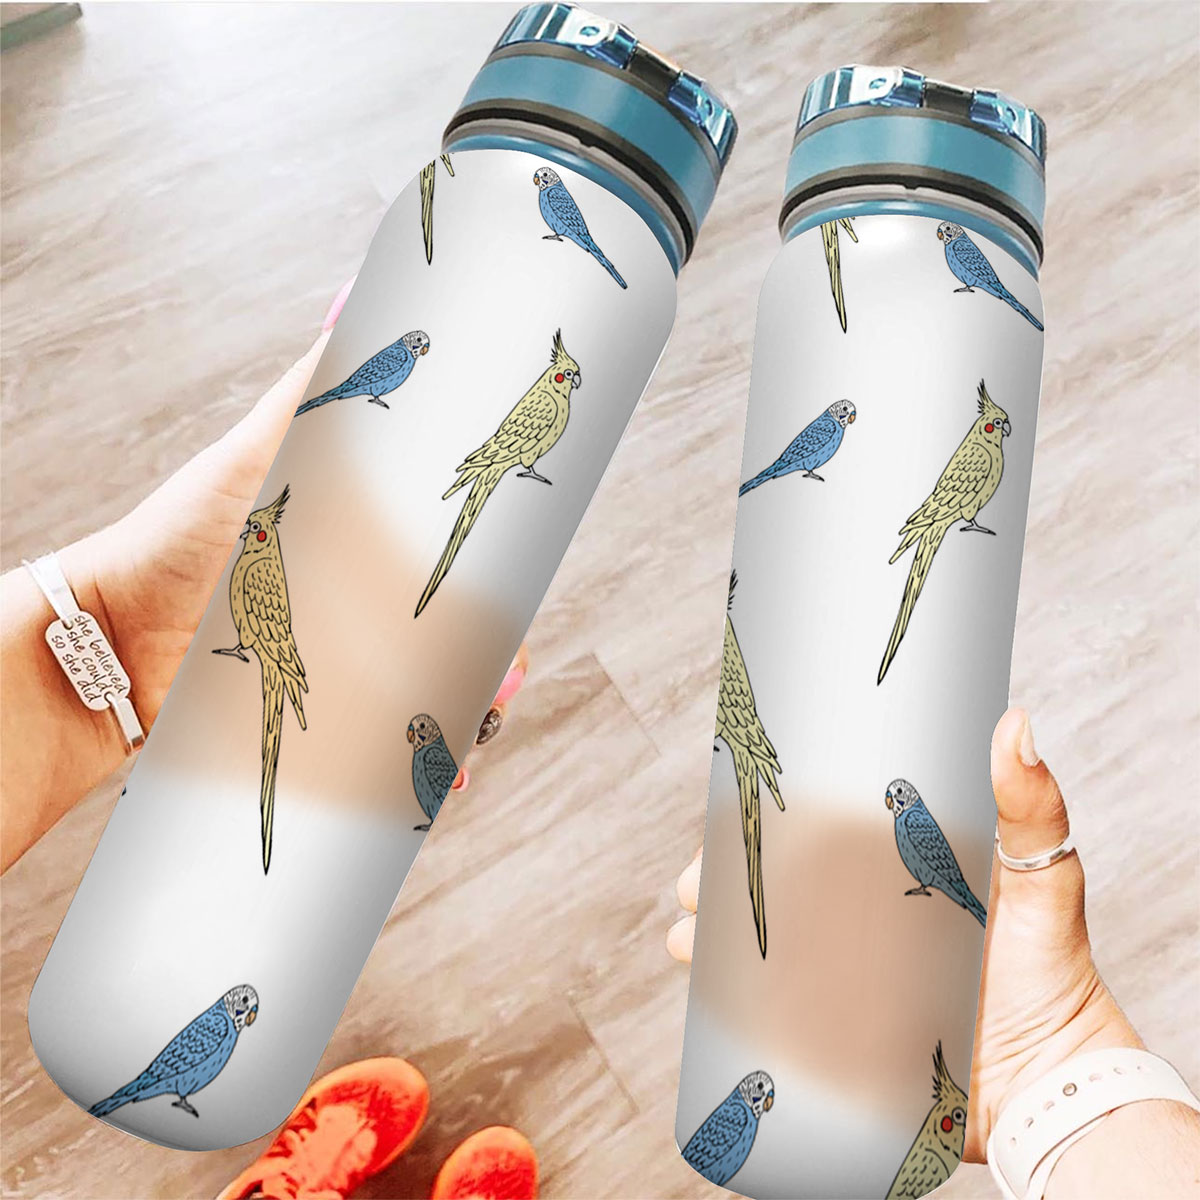 Budgie And Cockatiel Tracker Bottle